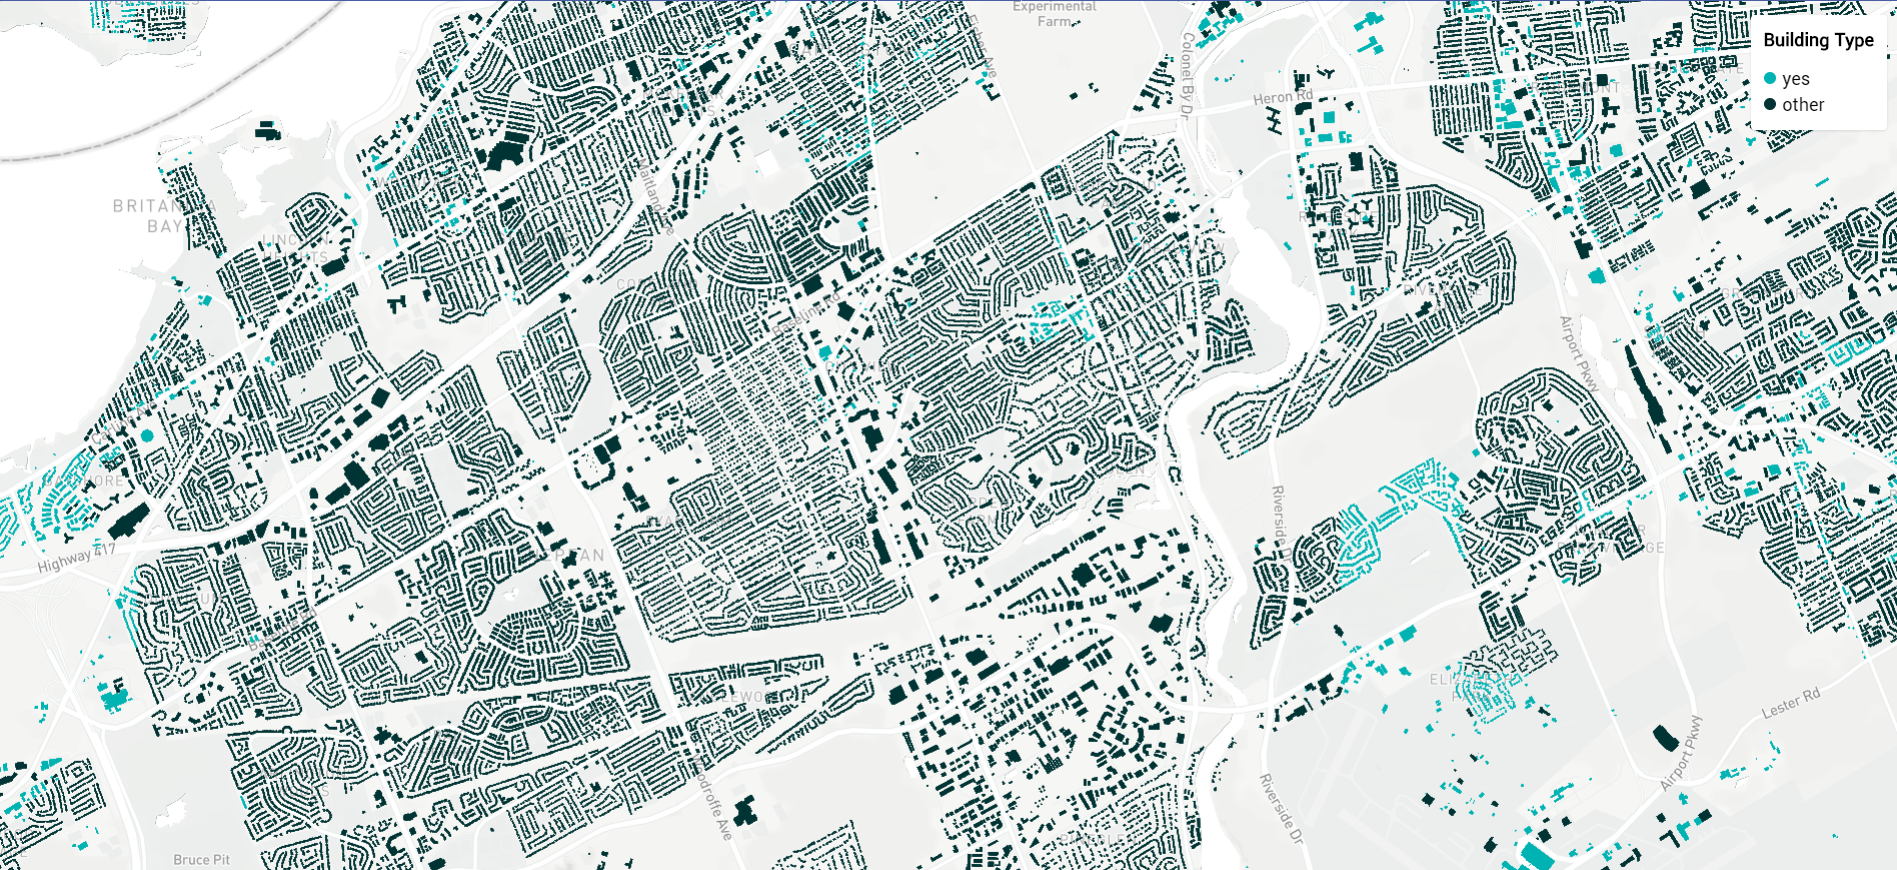 Image of the building footprints in Gatineau, Canada, collected from OpenStreetMap